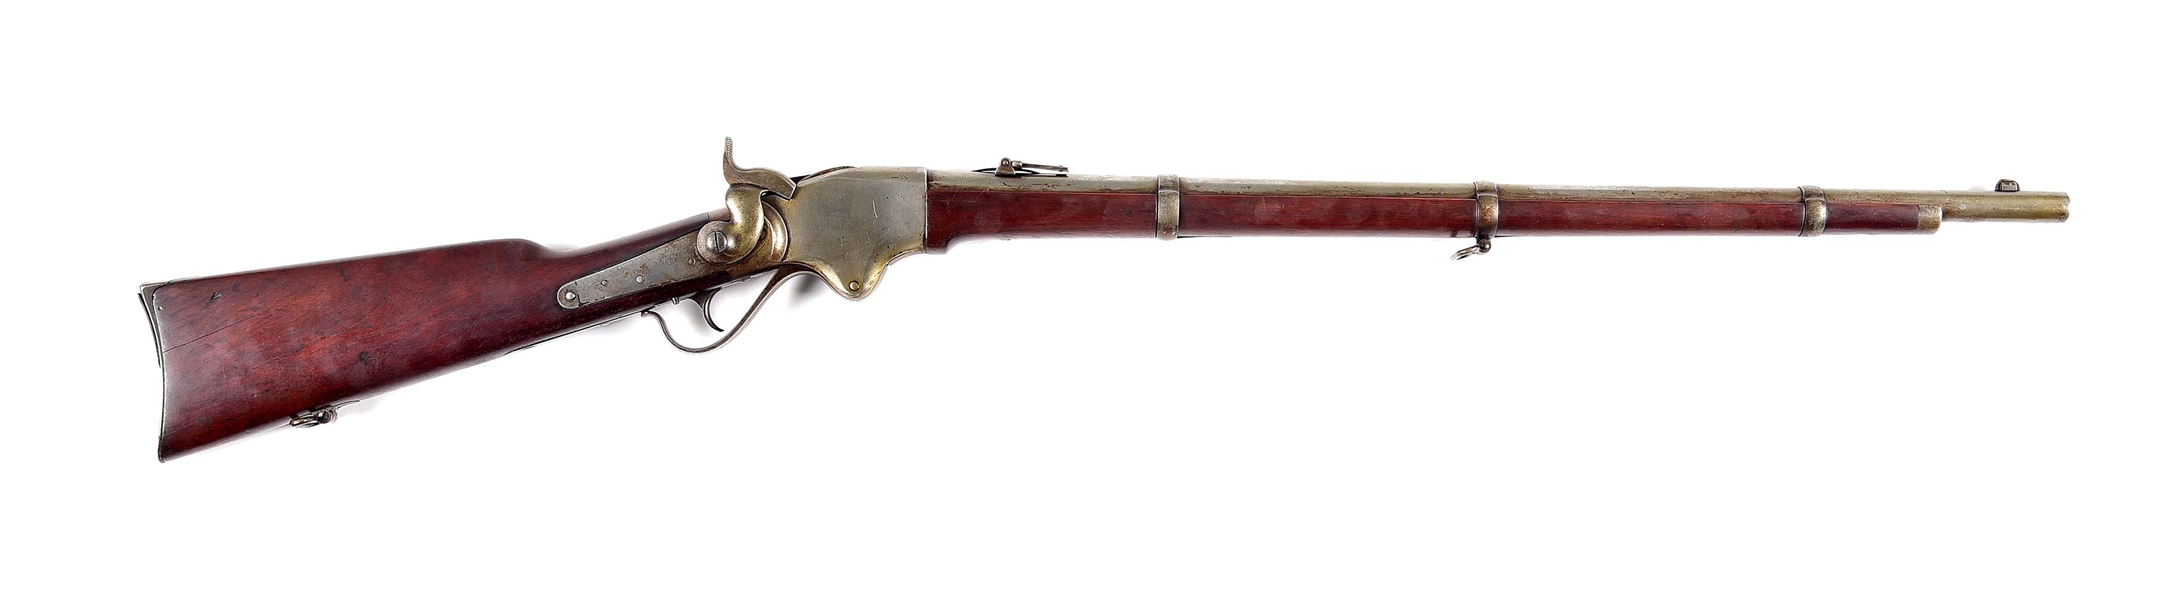 (A) SPENCER MODEL 1860 ARMY LEVER ACTION REPEATING RIFLE.